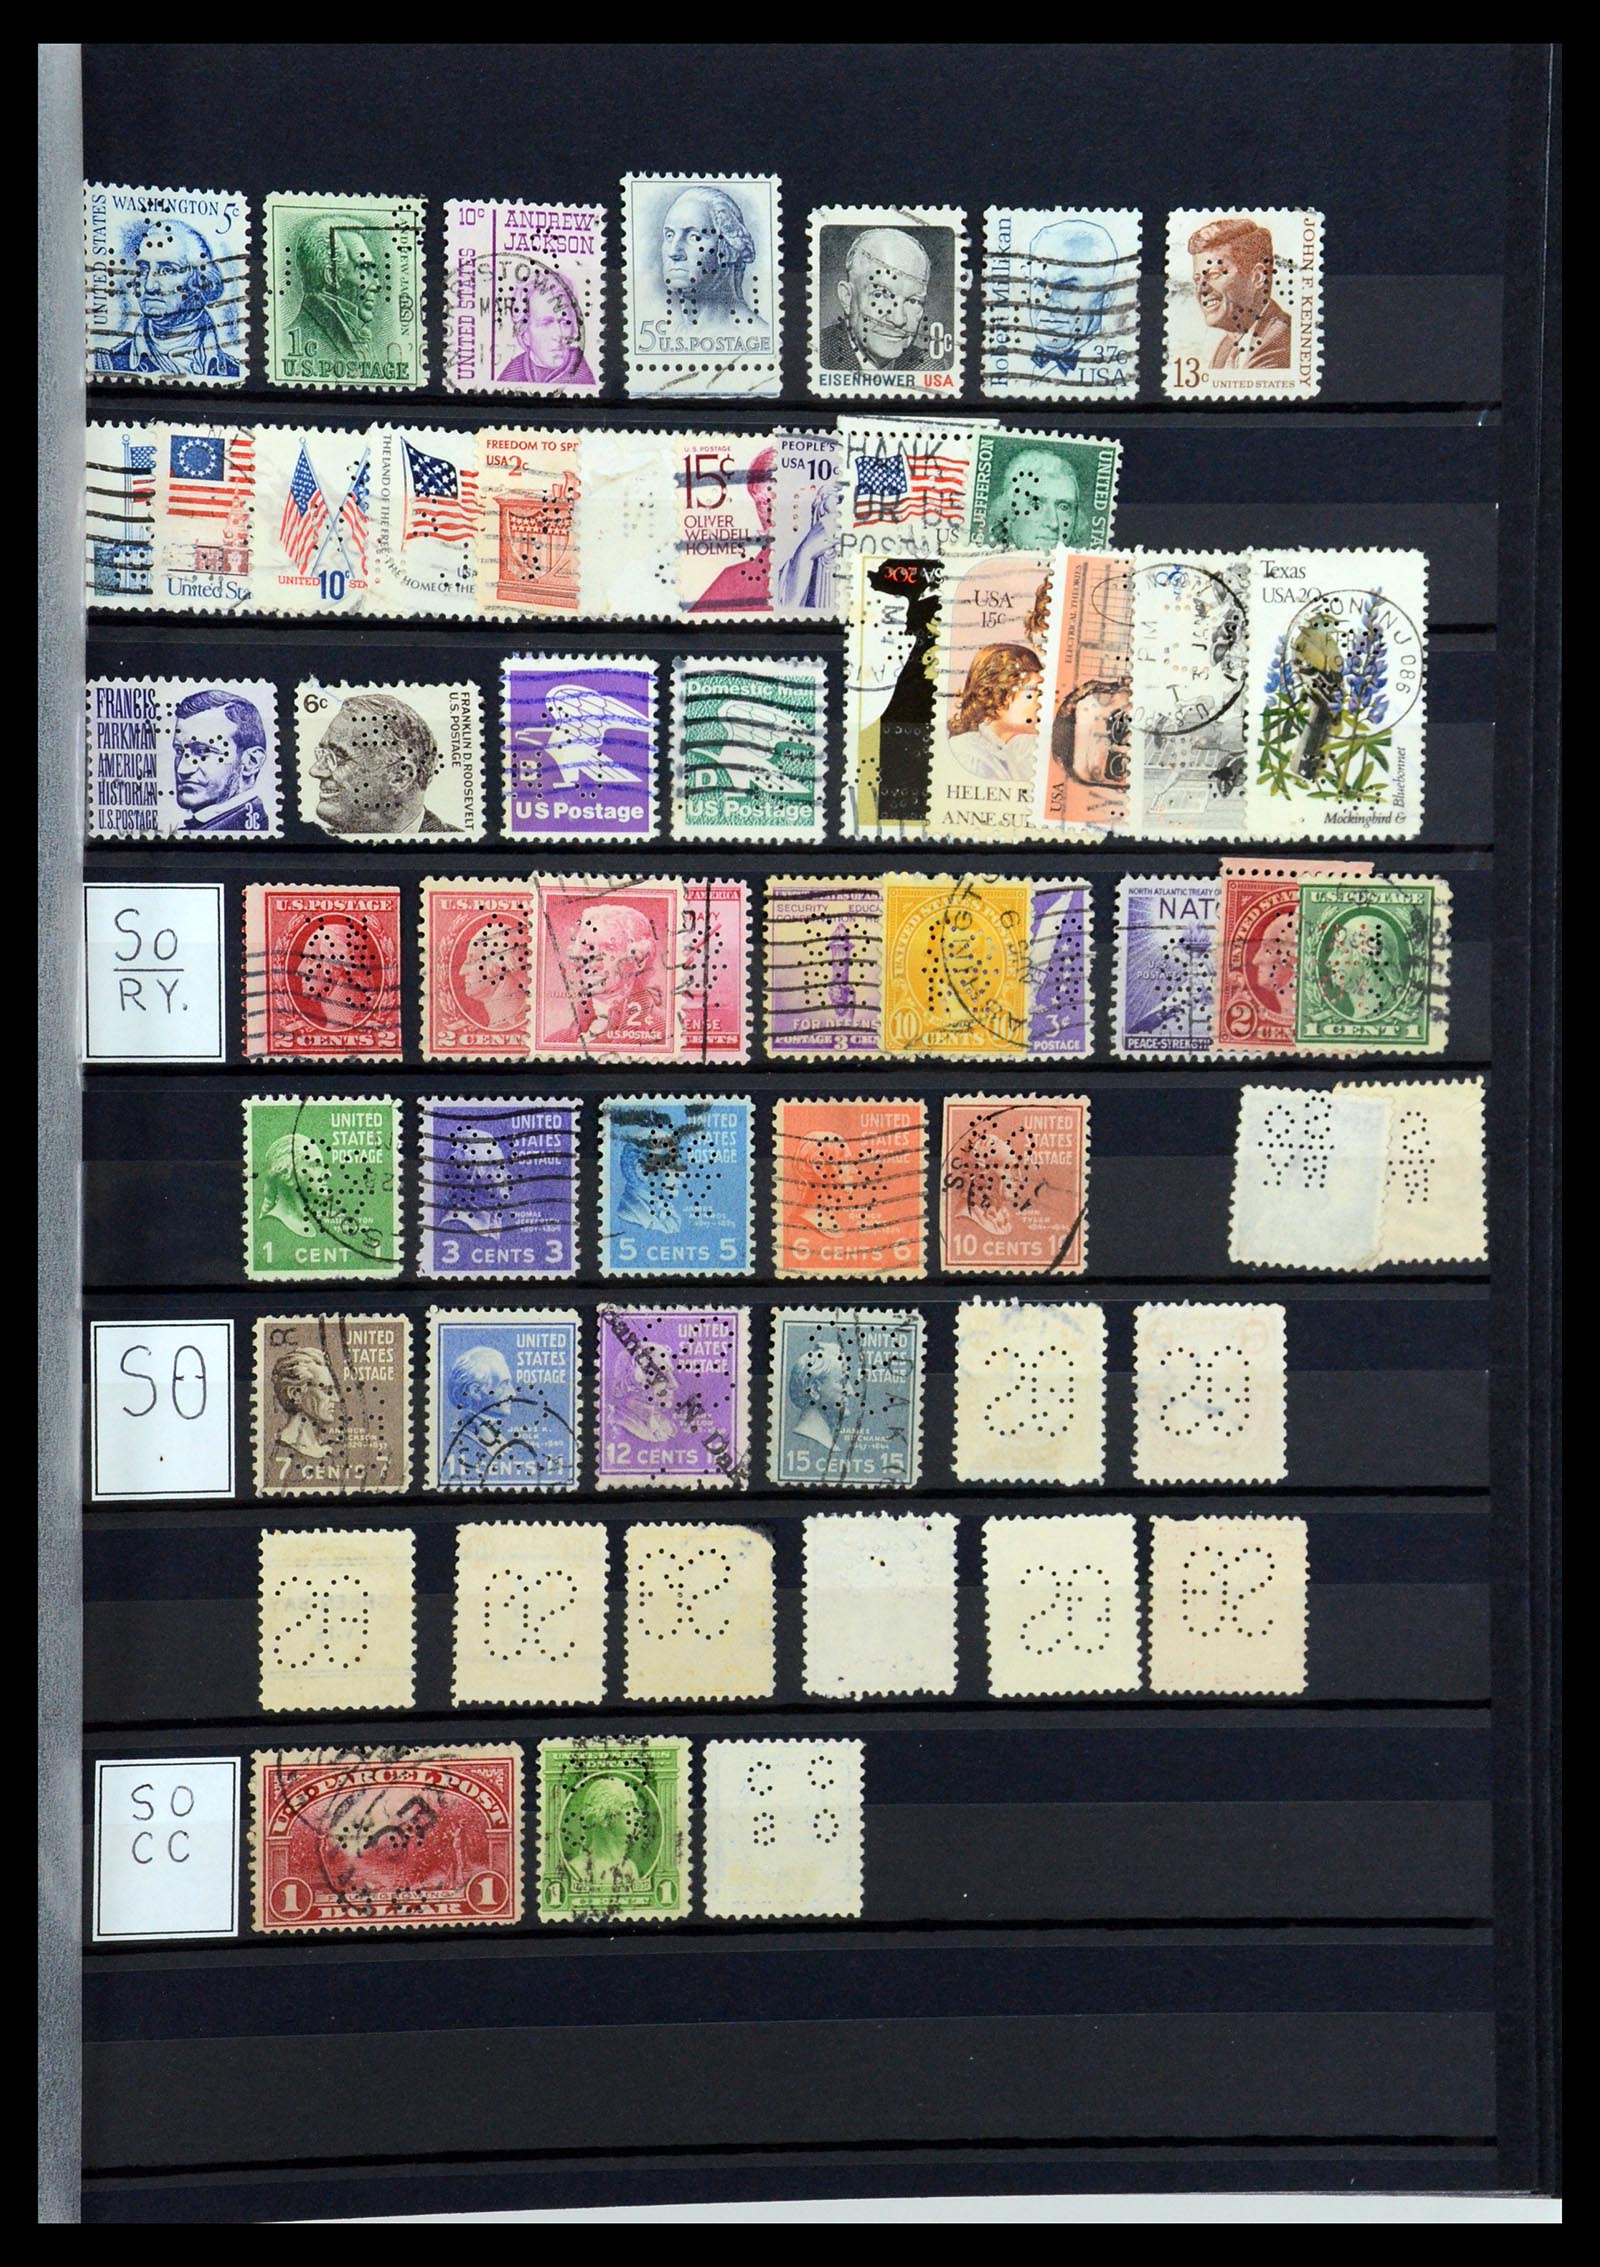 36388 131 - Stamp collection 36388 USA perfins.